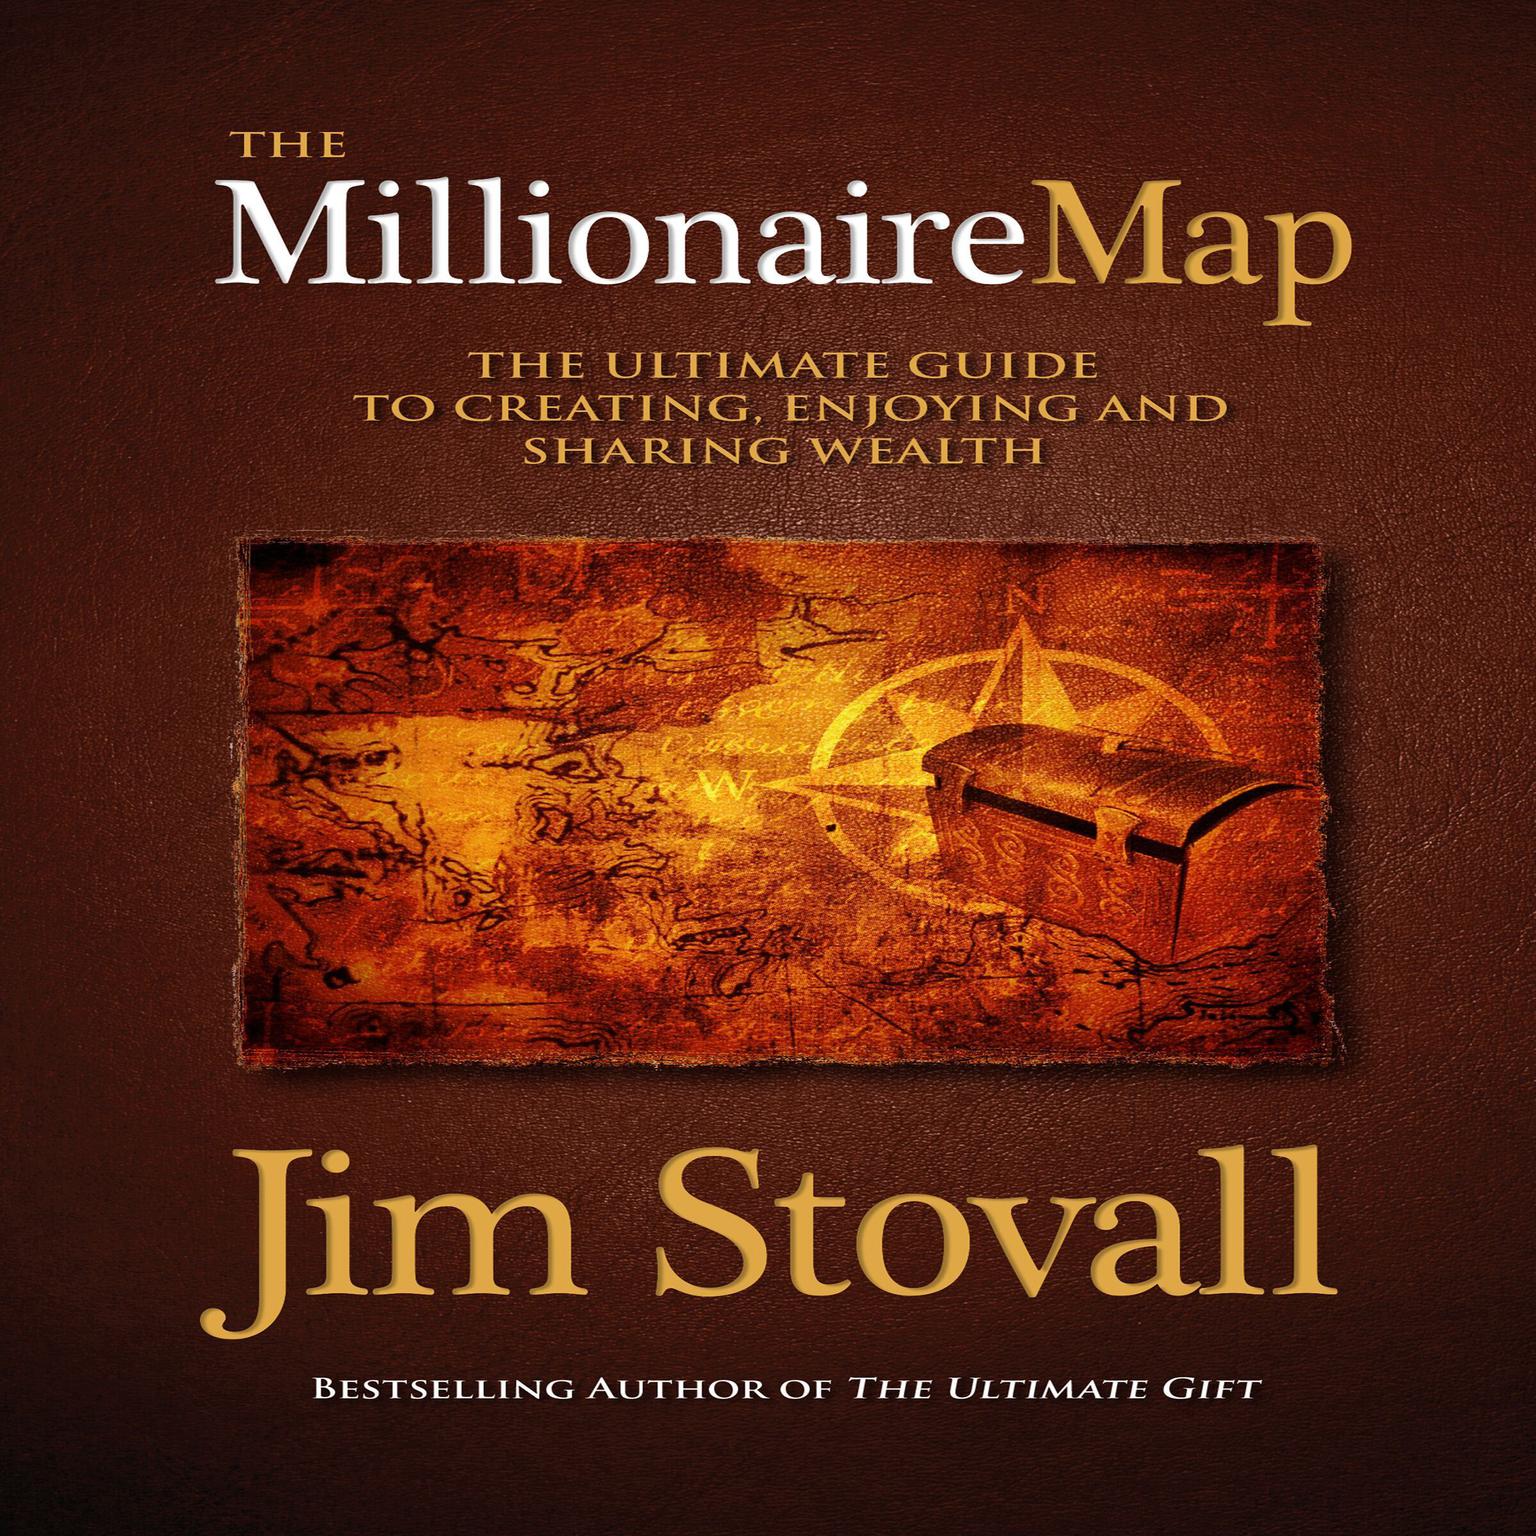 The Millionaire Map:The Ultimate Guide to Creating, Enjoying and Sharing Wealth Audiobook, by Jim Stovall